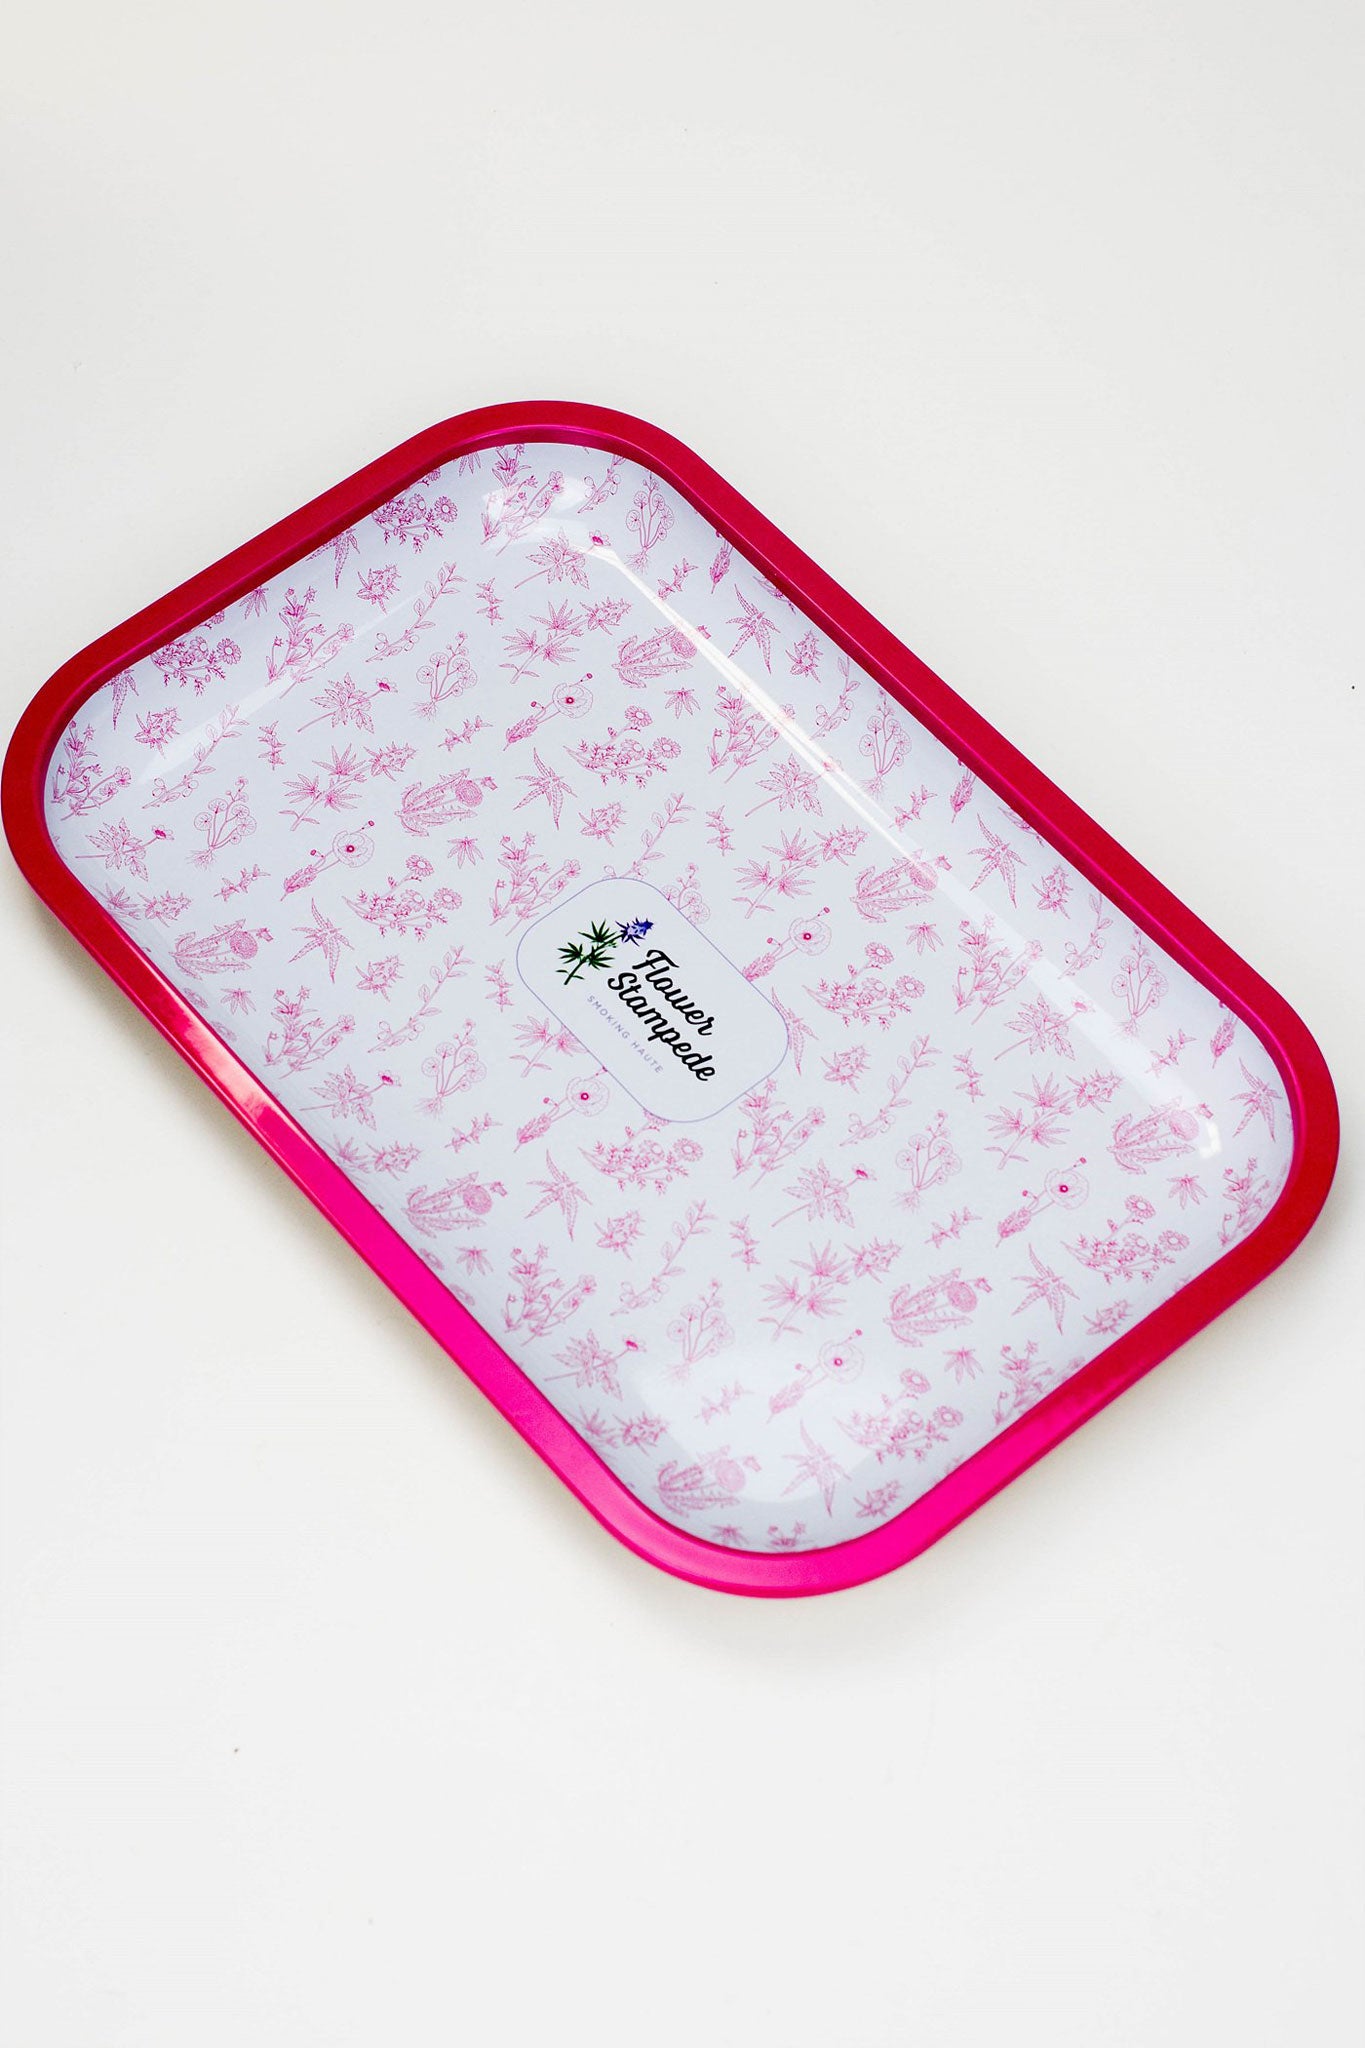 Roll in style with the Flower Stampede Rolling Tray. Featuring our Signature Floral Pattern in pink and white,